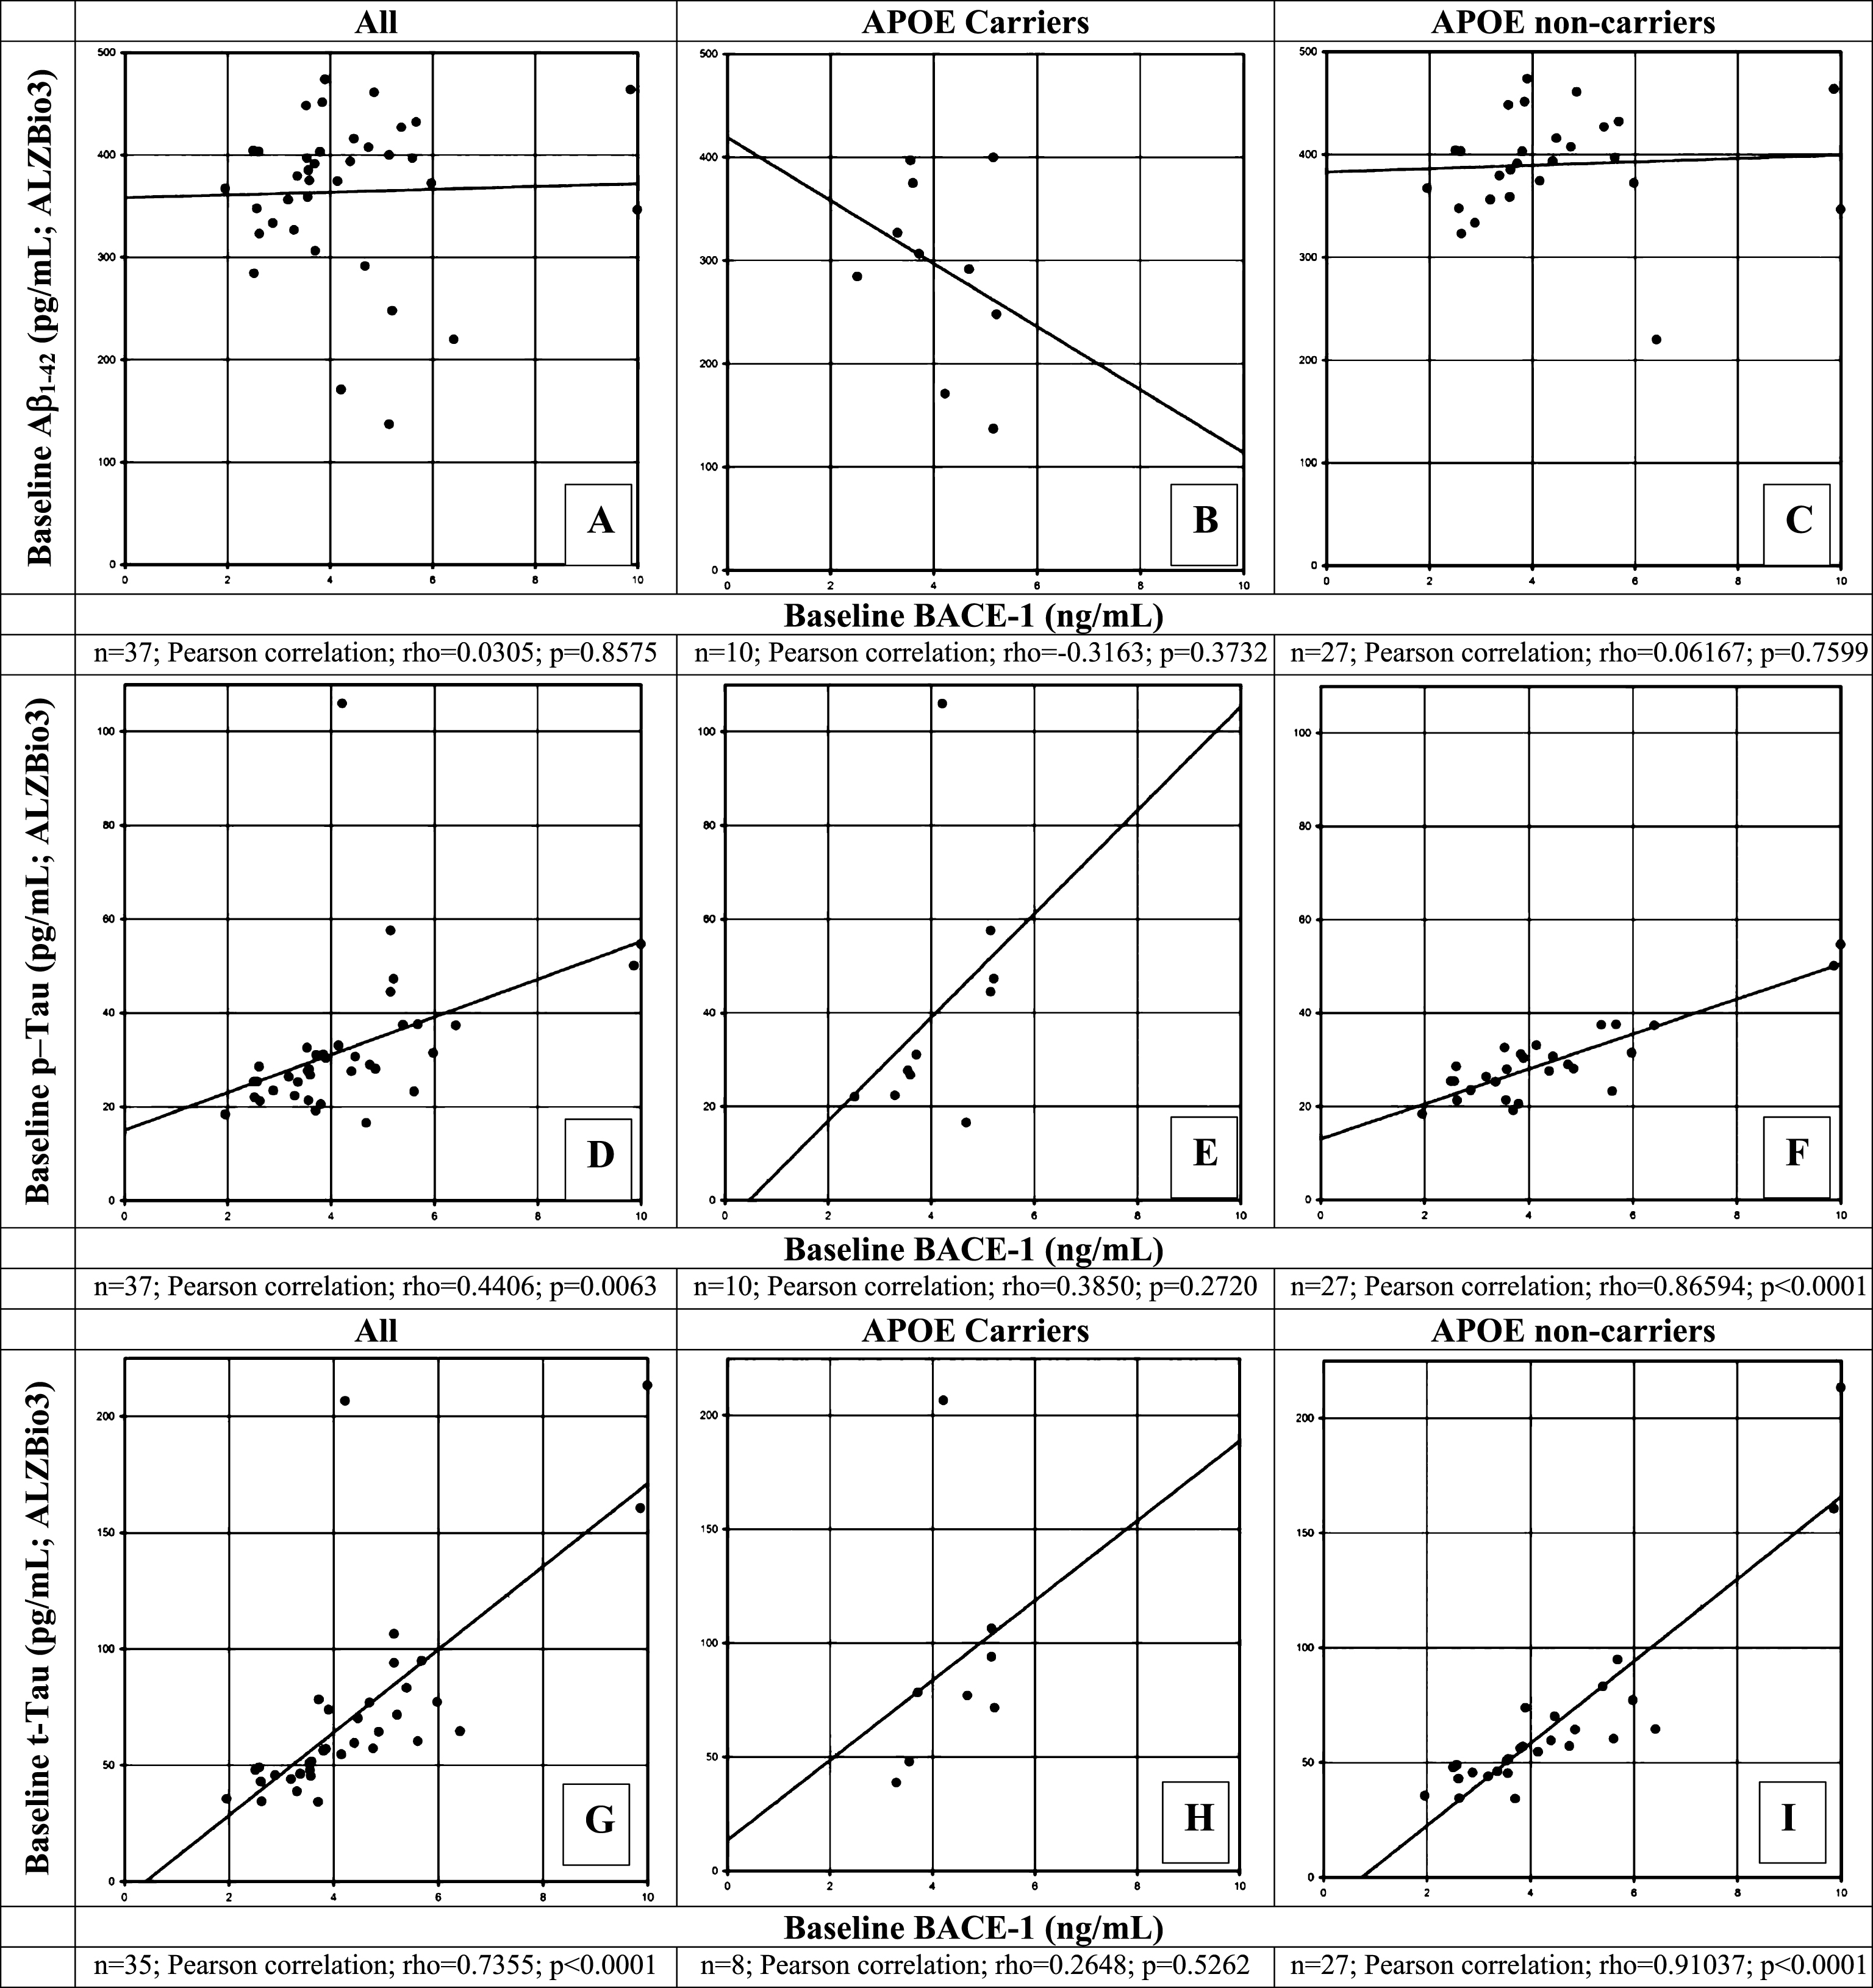 Correlation of β-site AβPP-cleaving enzyme-1 (BACE1) protein levels with Aβ1 - 42 (A-C), phosphorylated tau (p-tau181p, D-F), and total tau (t-tau, G-I) at baseline in CSF of healthy elderly for all participants (A, D, G), for apolipoprotein (APOE) ɛ4 allele carriers (B, E, H),and for APOE ɛ4 non-carriers (C, F, I) measured by the ALZBio3 (xMAP) assay. A Pearson correlation coefficient was calculated to evaluate the possible correlation between BACE1 and Aβ1 - 42 (A-C); between BACE1 and p-tau181p (D-F); and between BACE1 and t-tau (G-I) for all, APOE ɛ4 carriers and non-carriers, respectively. Number of participants for whom samples could be analyzed and for which levels were above LOQ are indicated below each panel. p < 0.05 was set as a statistically significant level.